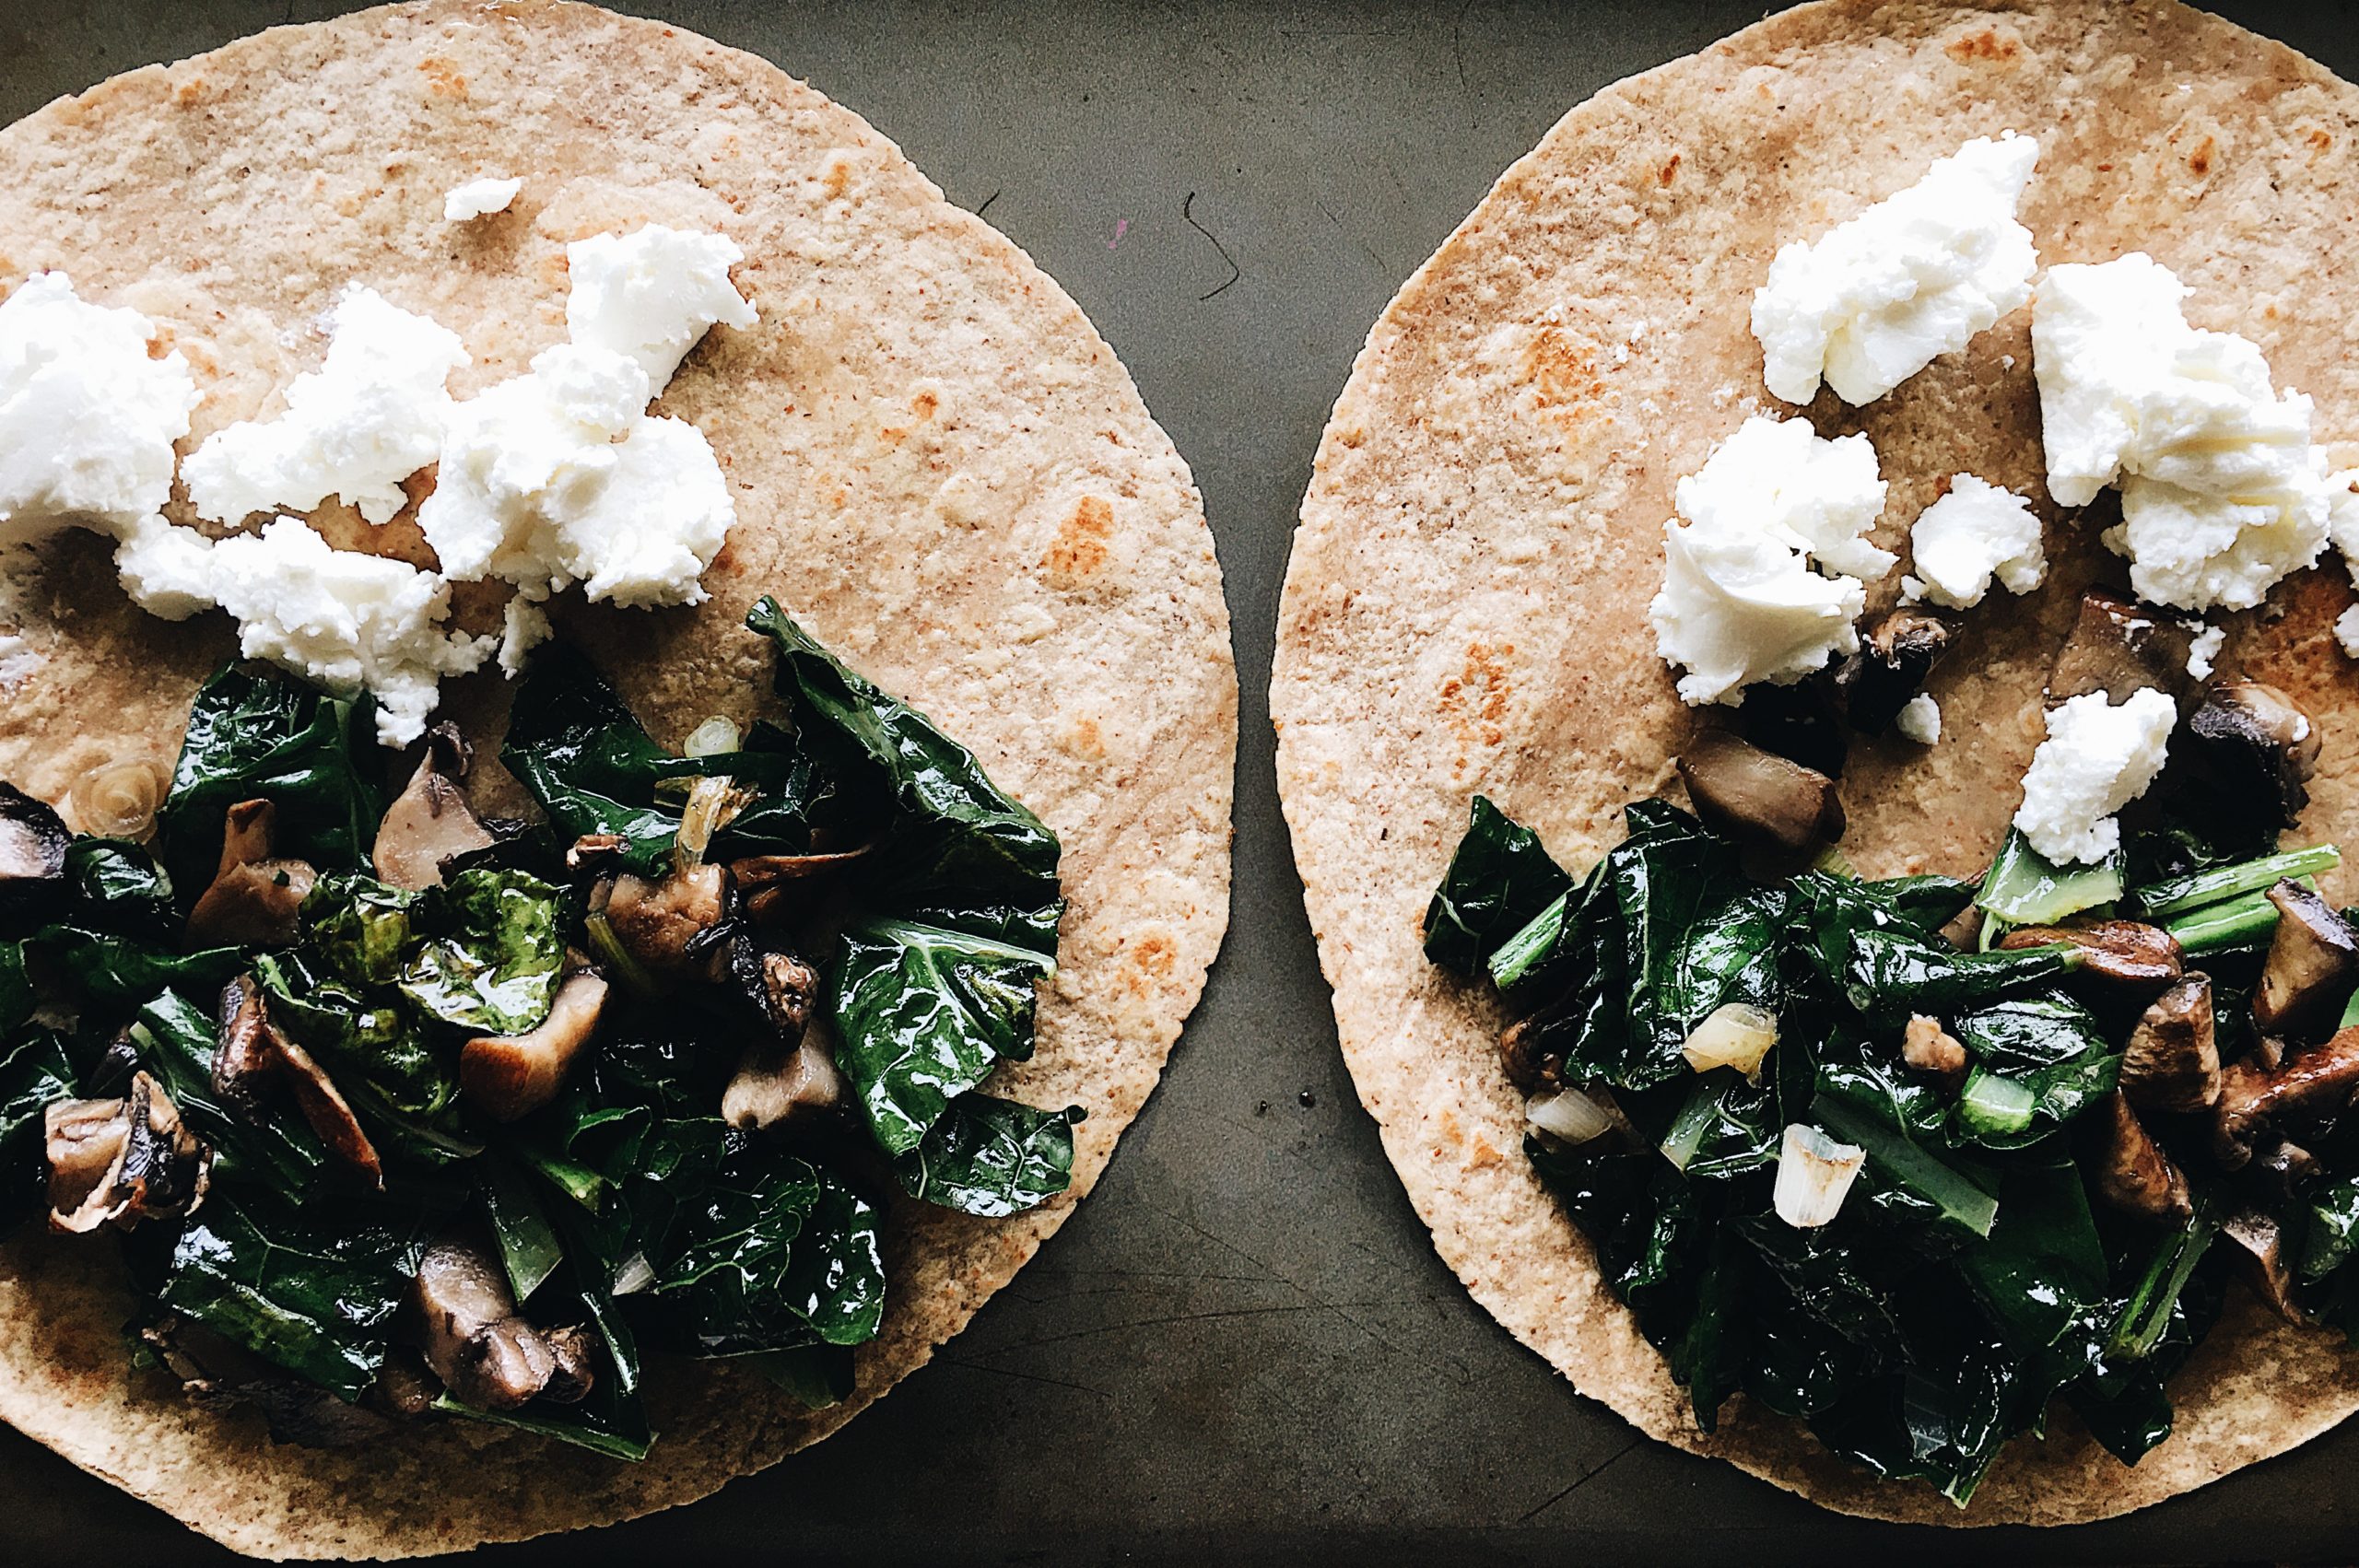 Process photo for Kale, Mushroom and Goat Cheese Quesadillas. Recipe by Alysha Melnyk with Taproot Farms, PA.